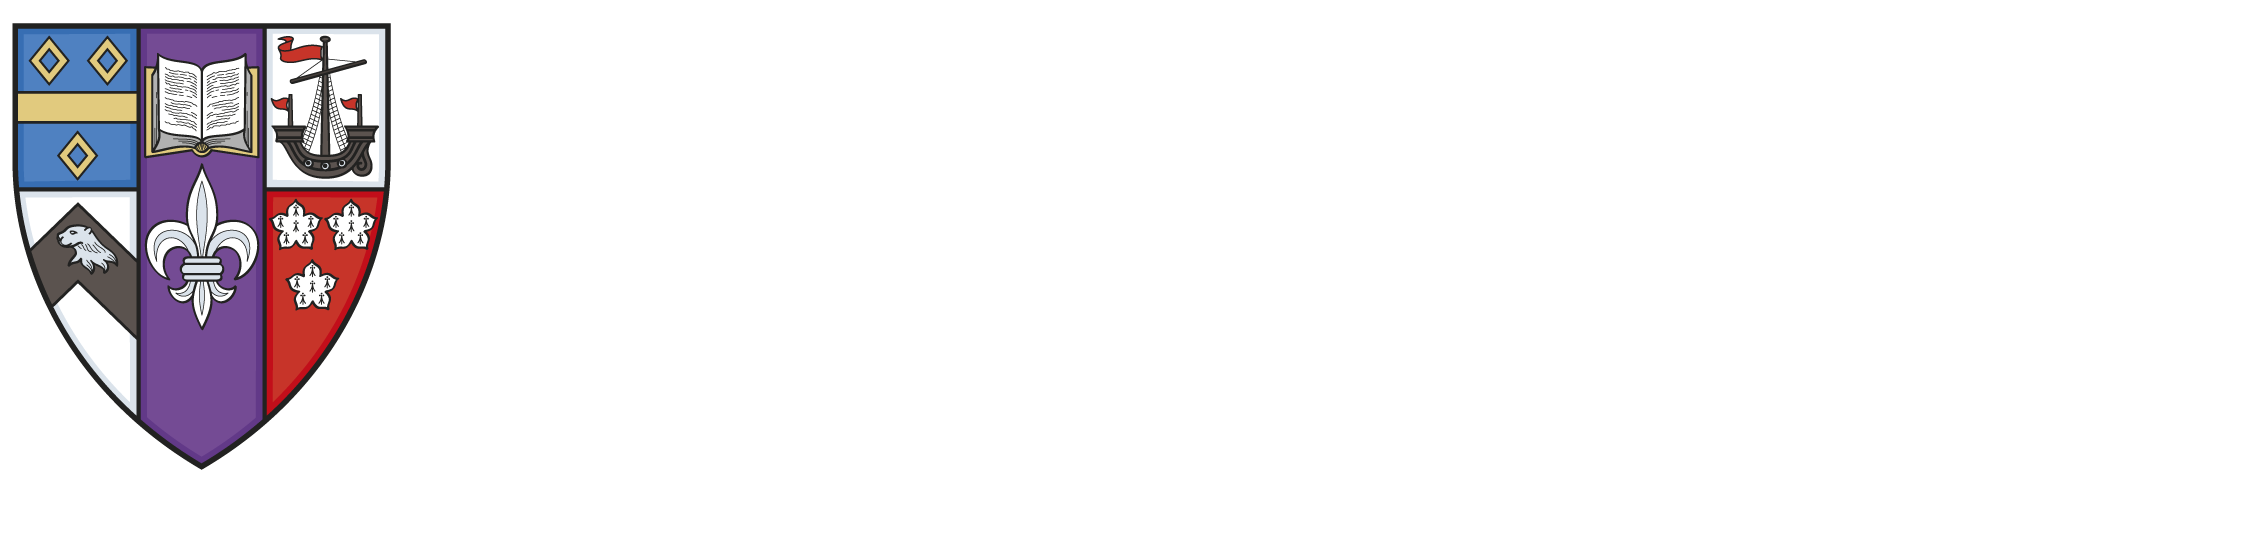 St Mary's College crest